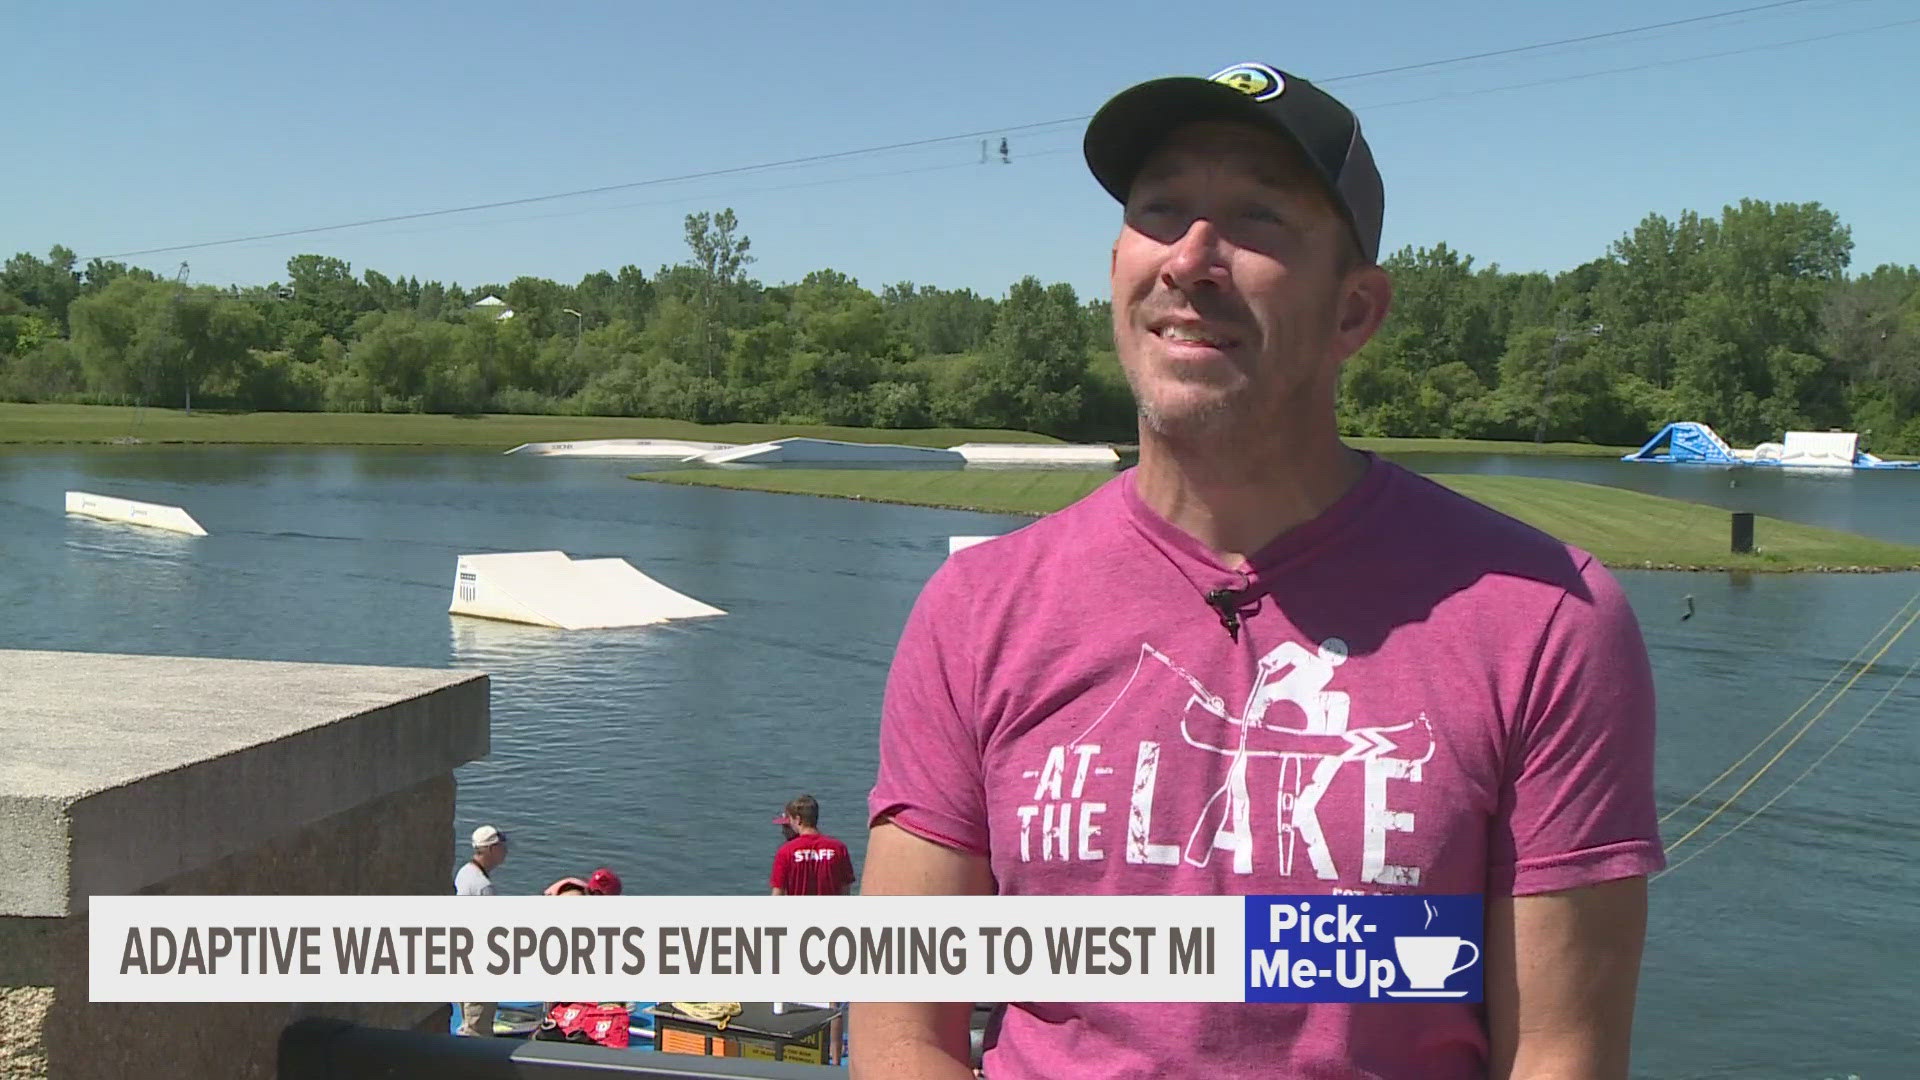 The event has traditionally been held in Wisconsin, but organizers decided to expand to West Michigan this summer.